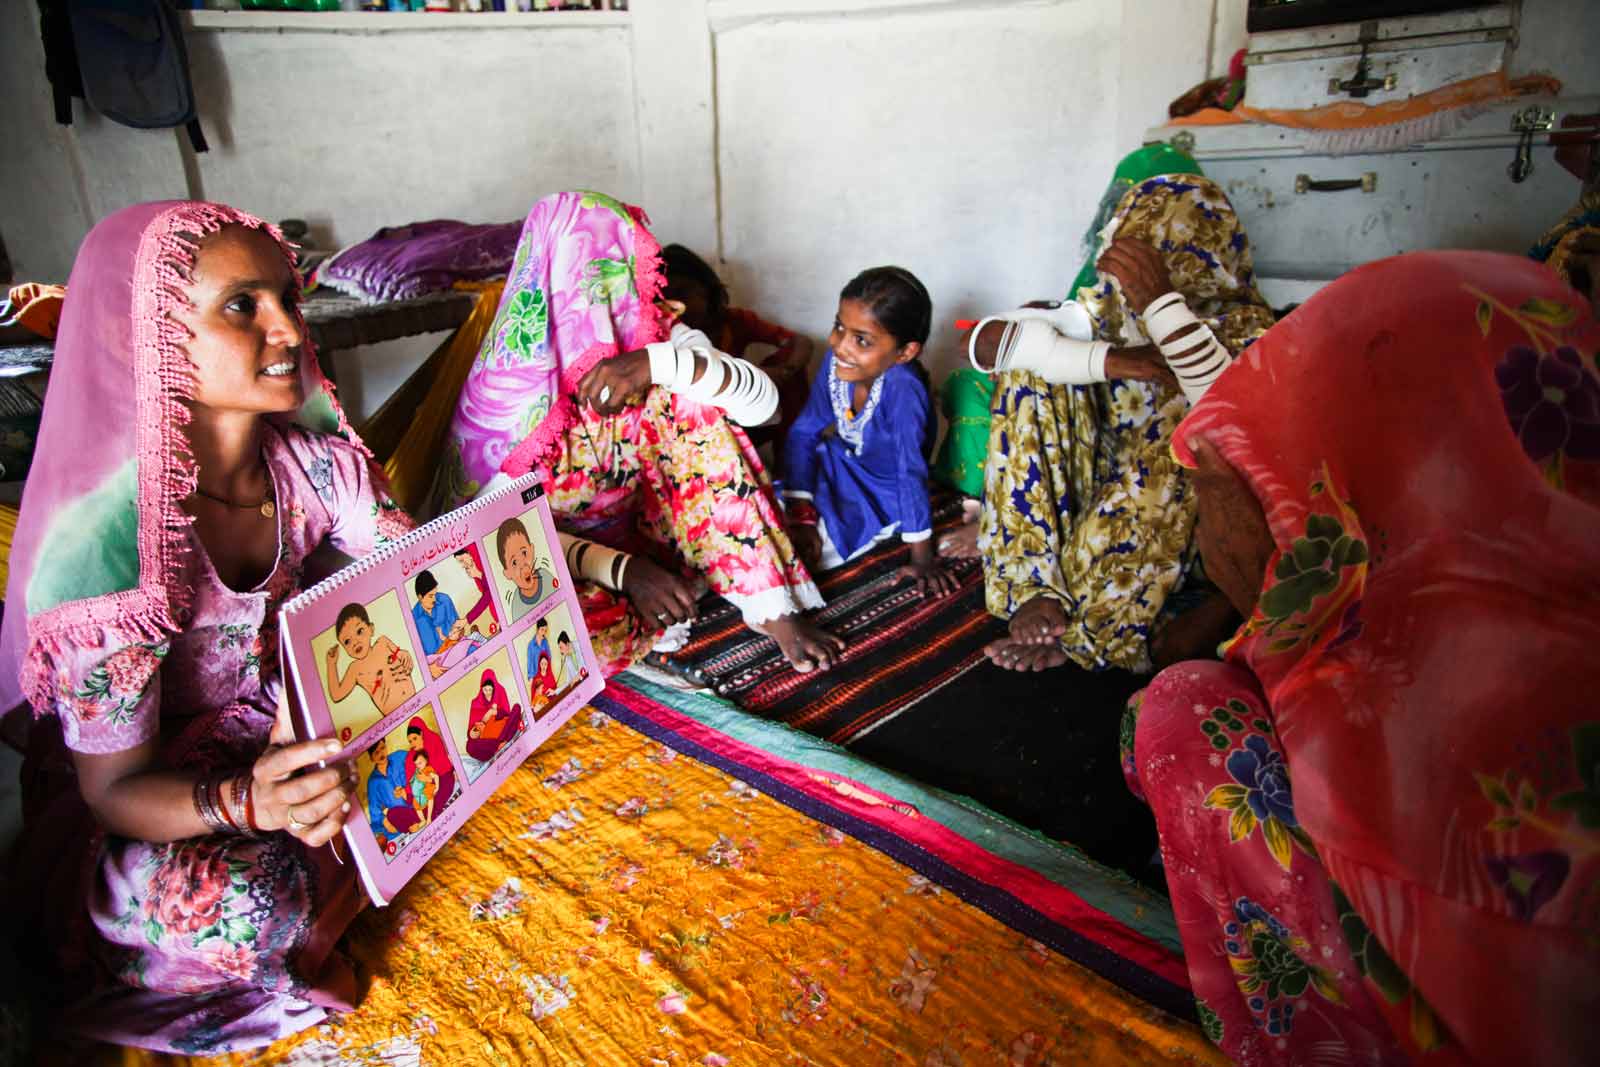  Bai conducts a health education session for village women. As she shows them a book of illustrations, she exhorts mothers to take their babies to the health centre six times within the first 15 months of birth. These six visits, she says, will protect every child from nine dangerous illnesses.